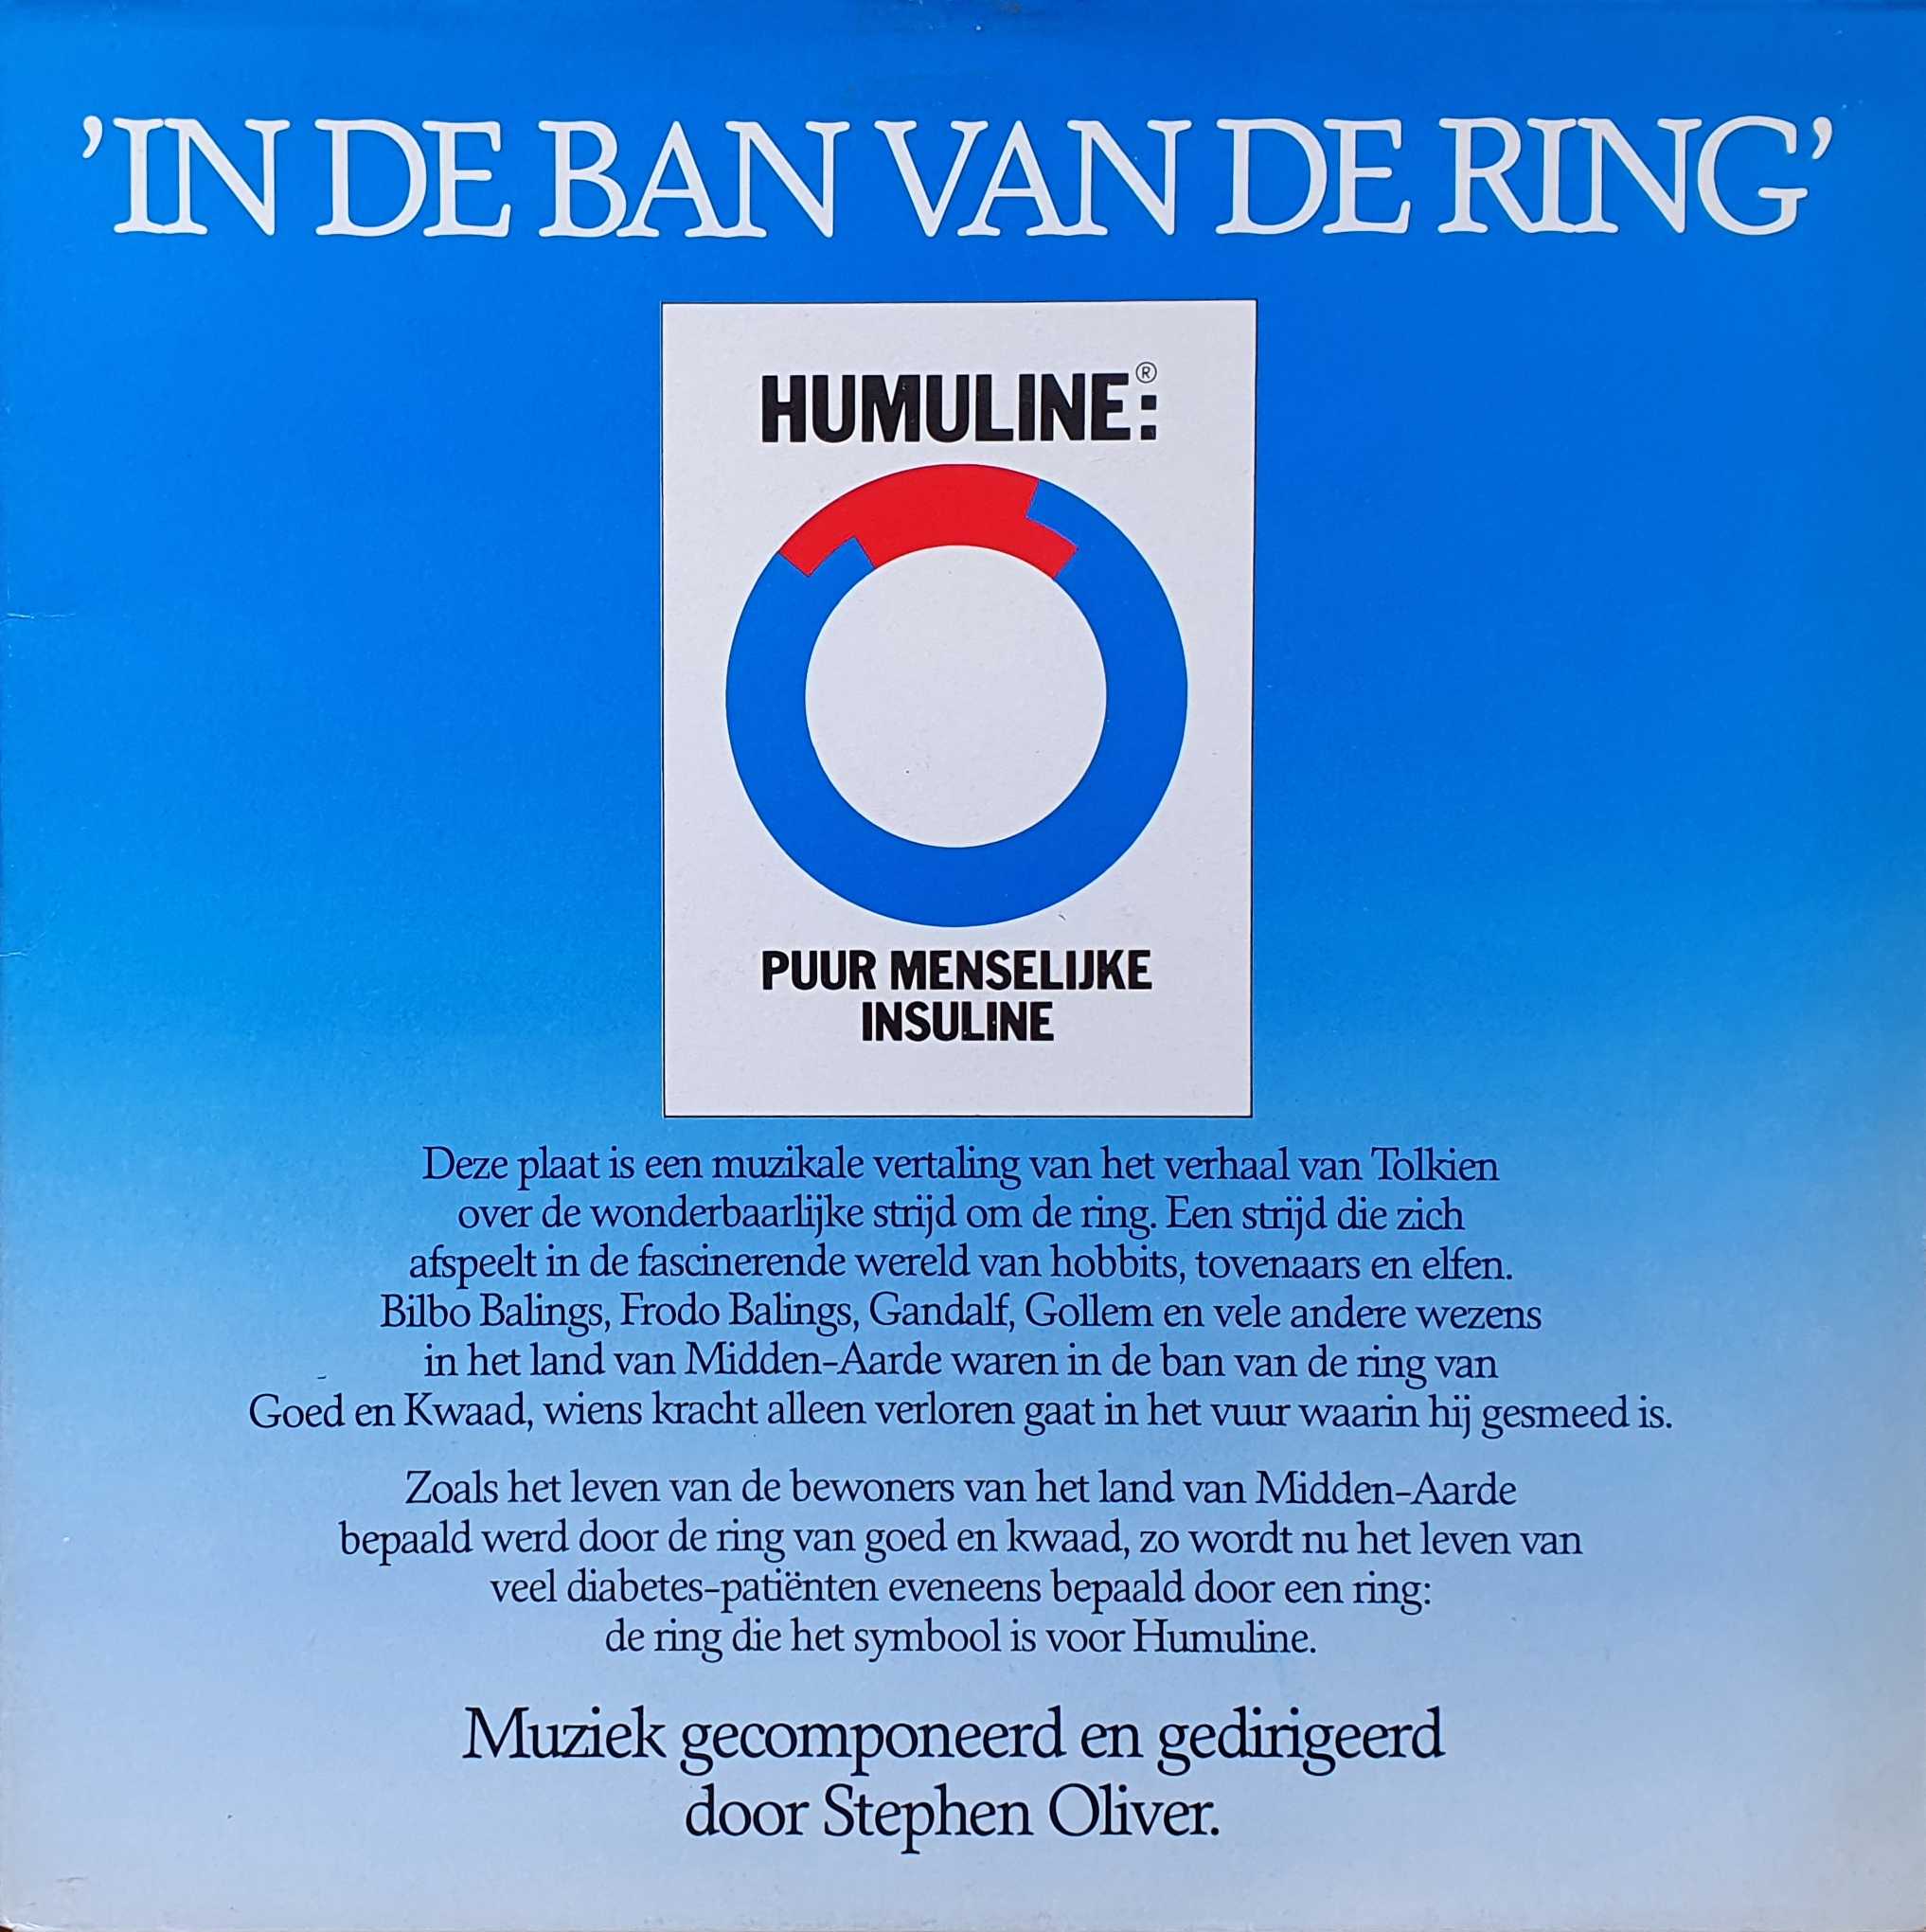 Picture of REH 415-iD In de ban van de ring (Dutch import) by artist Various from the BBC albums - Records and Tapes library